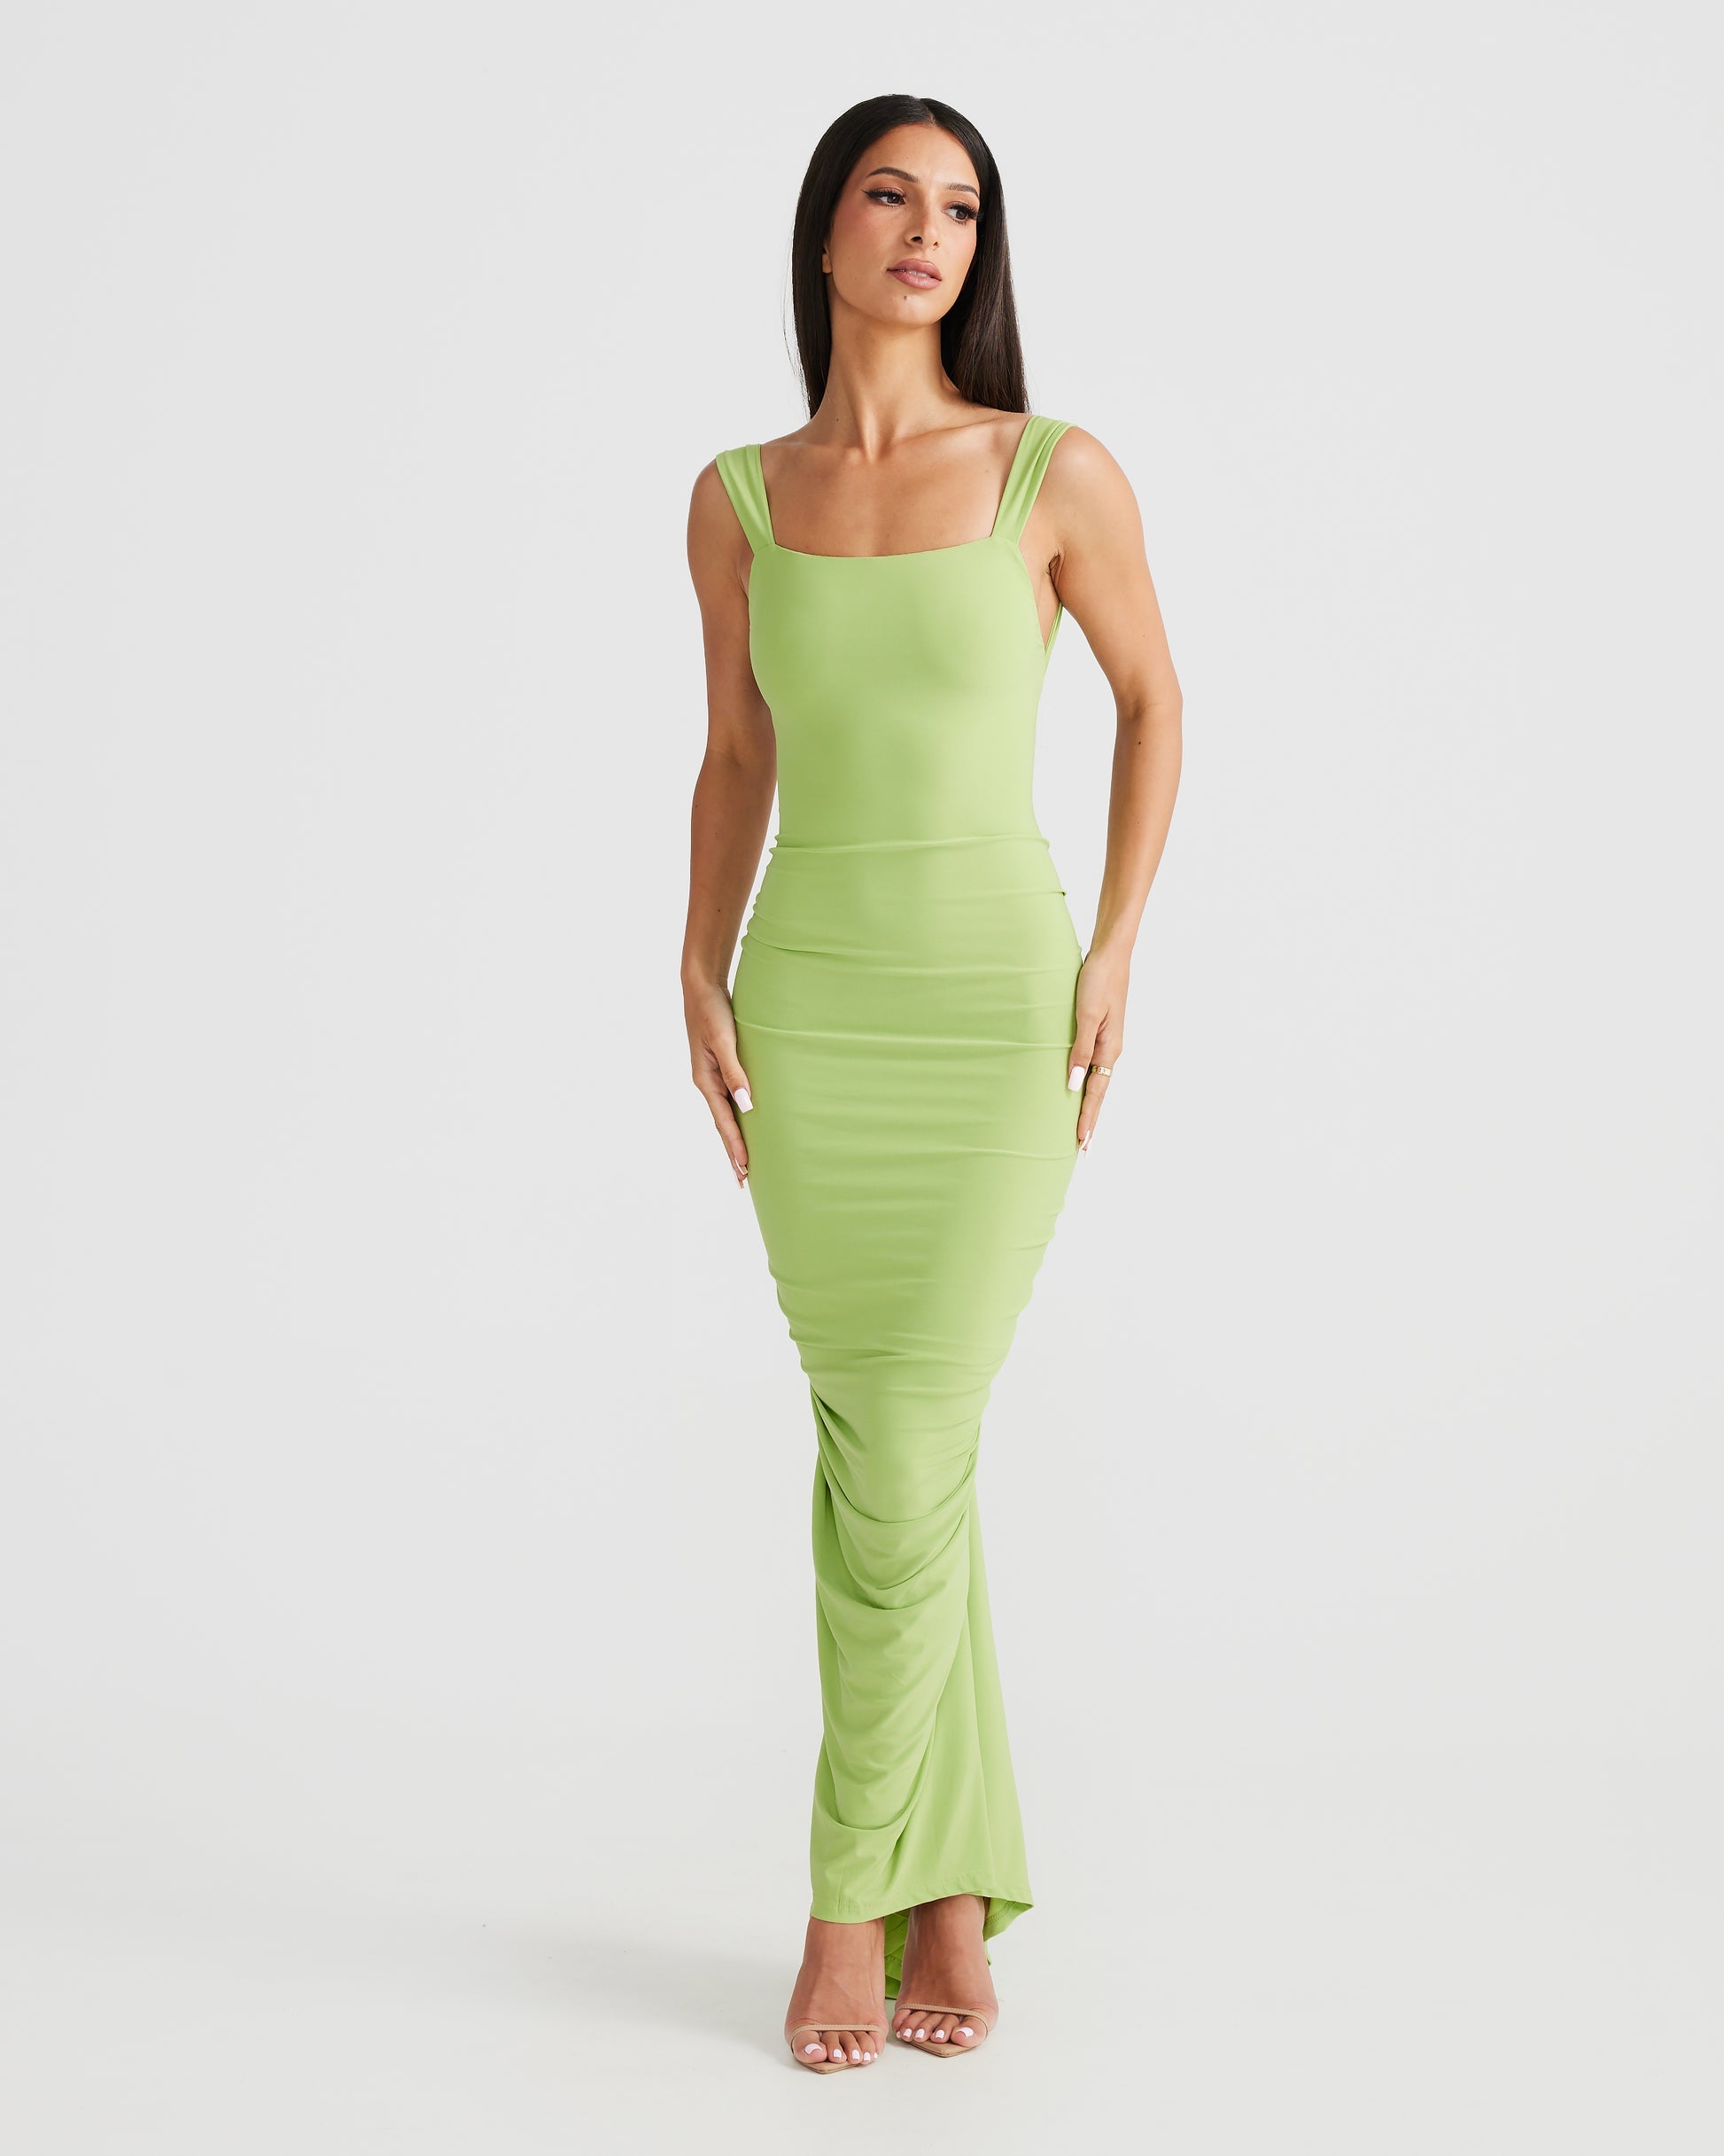 MÉLANI The Label SABIA Lime Ruched Bum Backless Dress